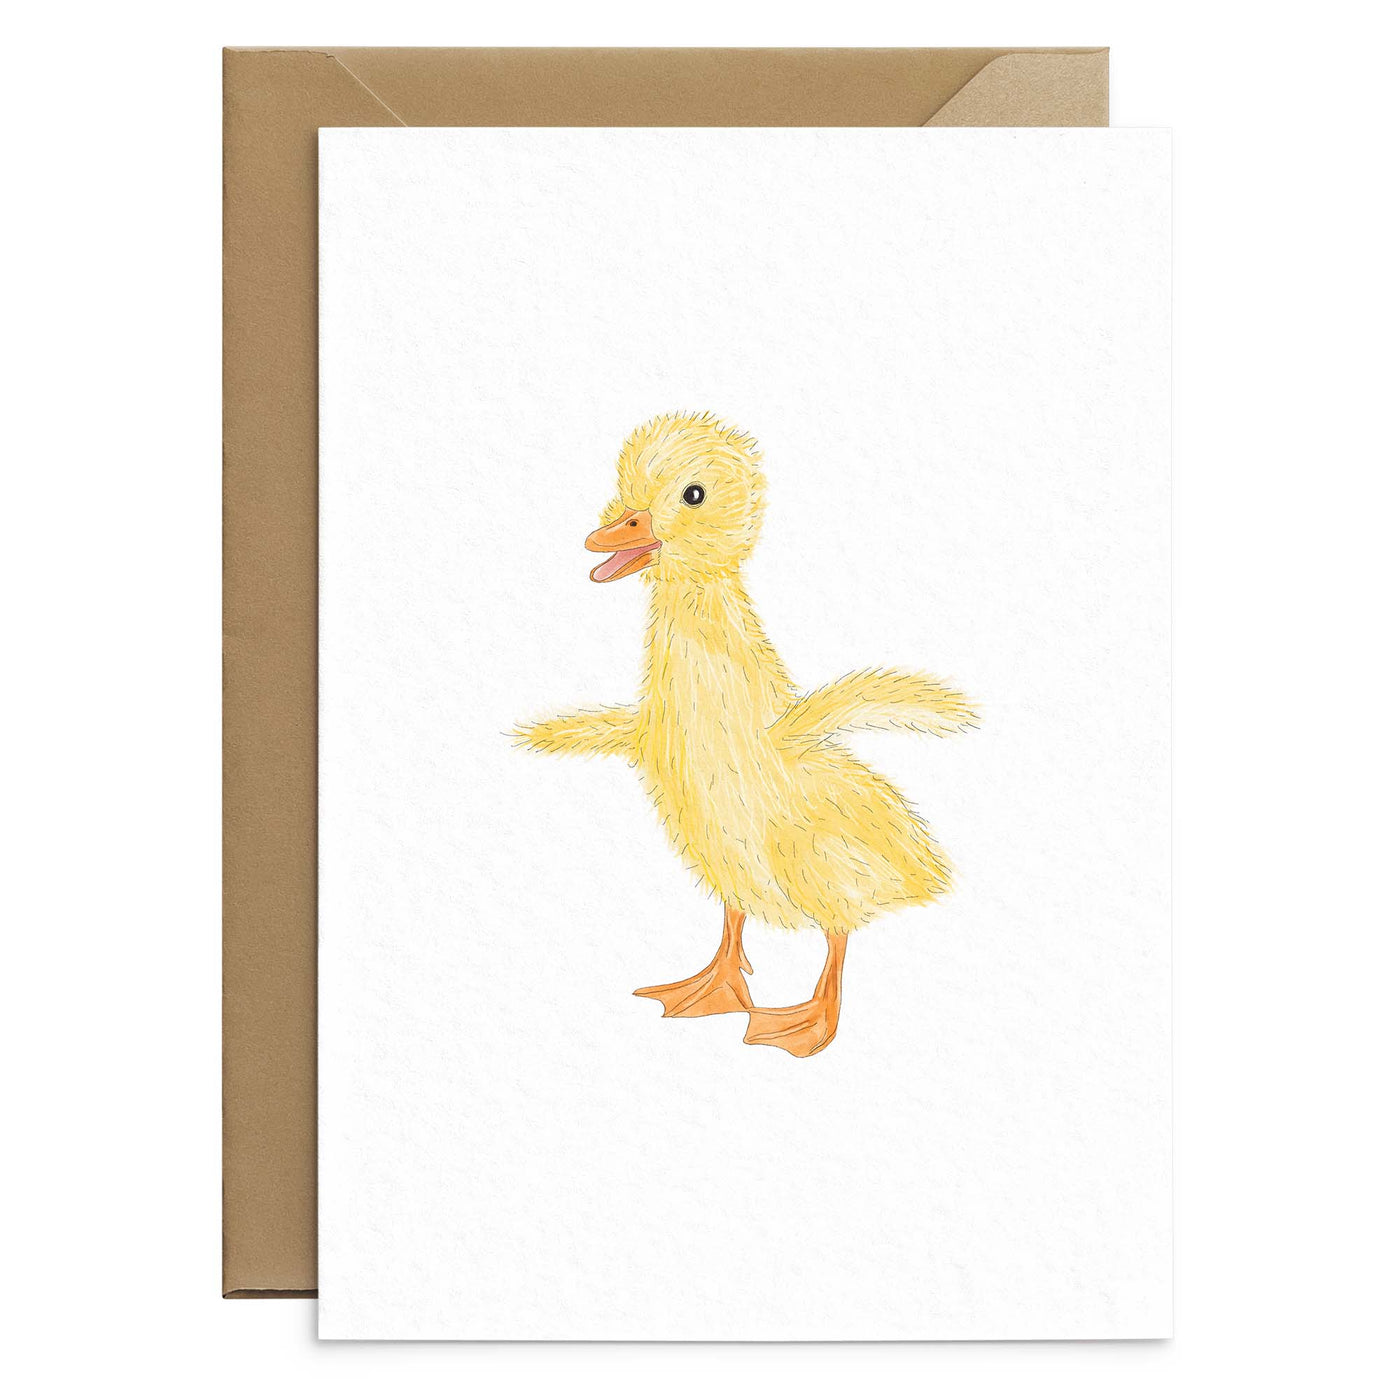 A white greetings card featuring an adorable illustration of a yellow duckling. No text. Card is laid out on top of brown recycled envelope. Easter greetings cards by Poppins and co.